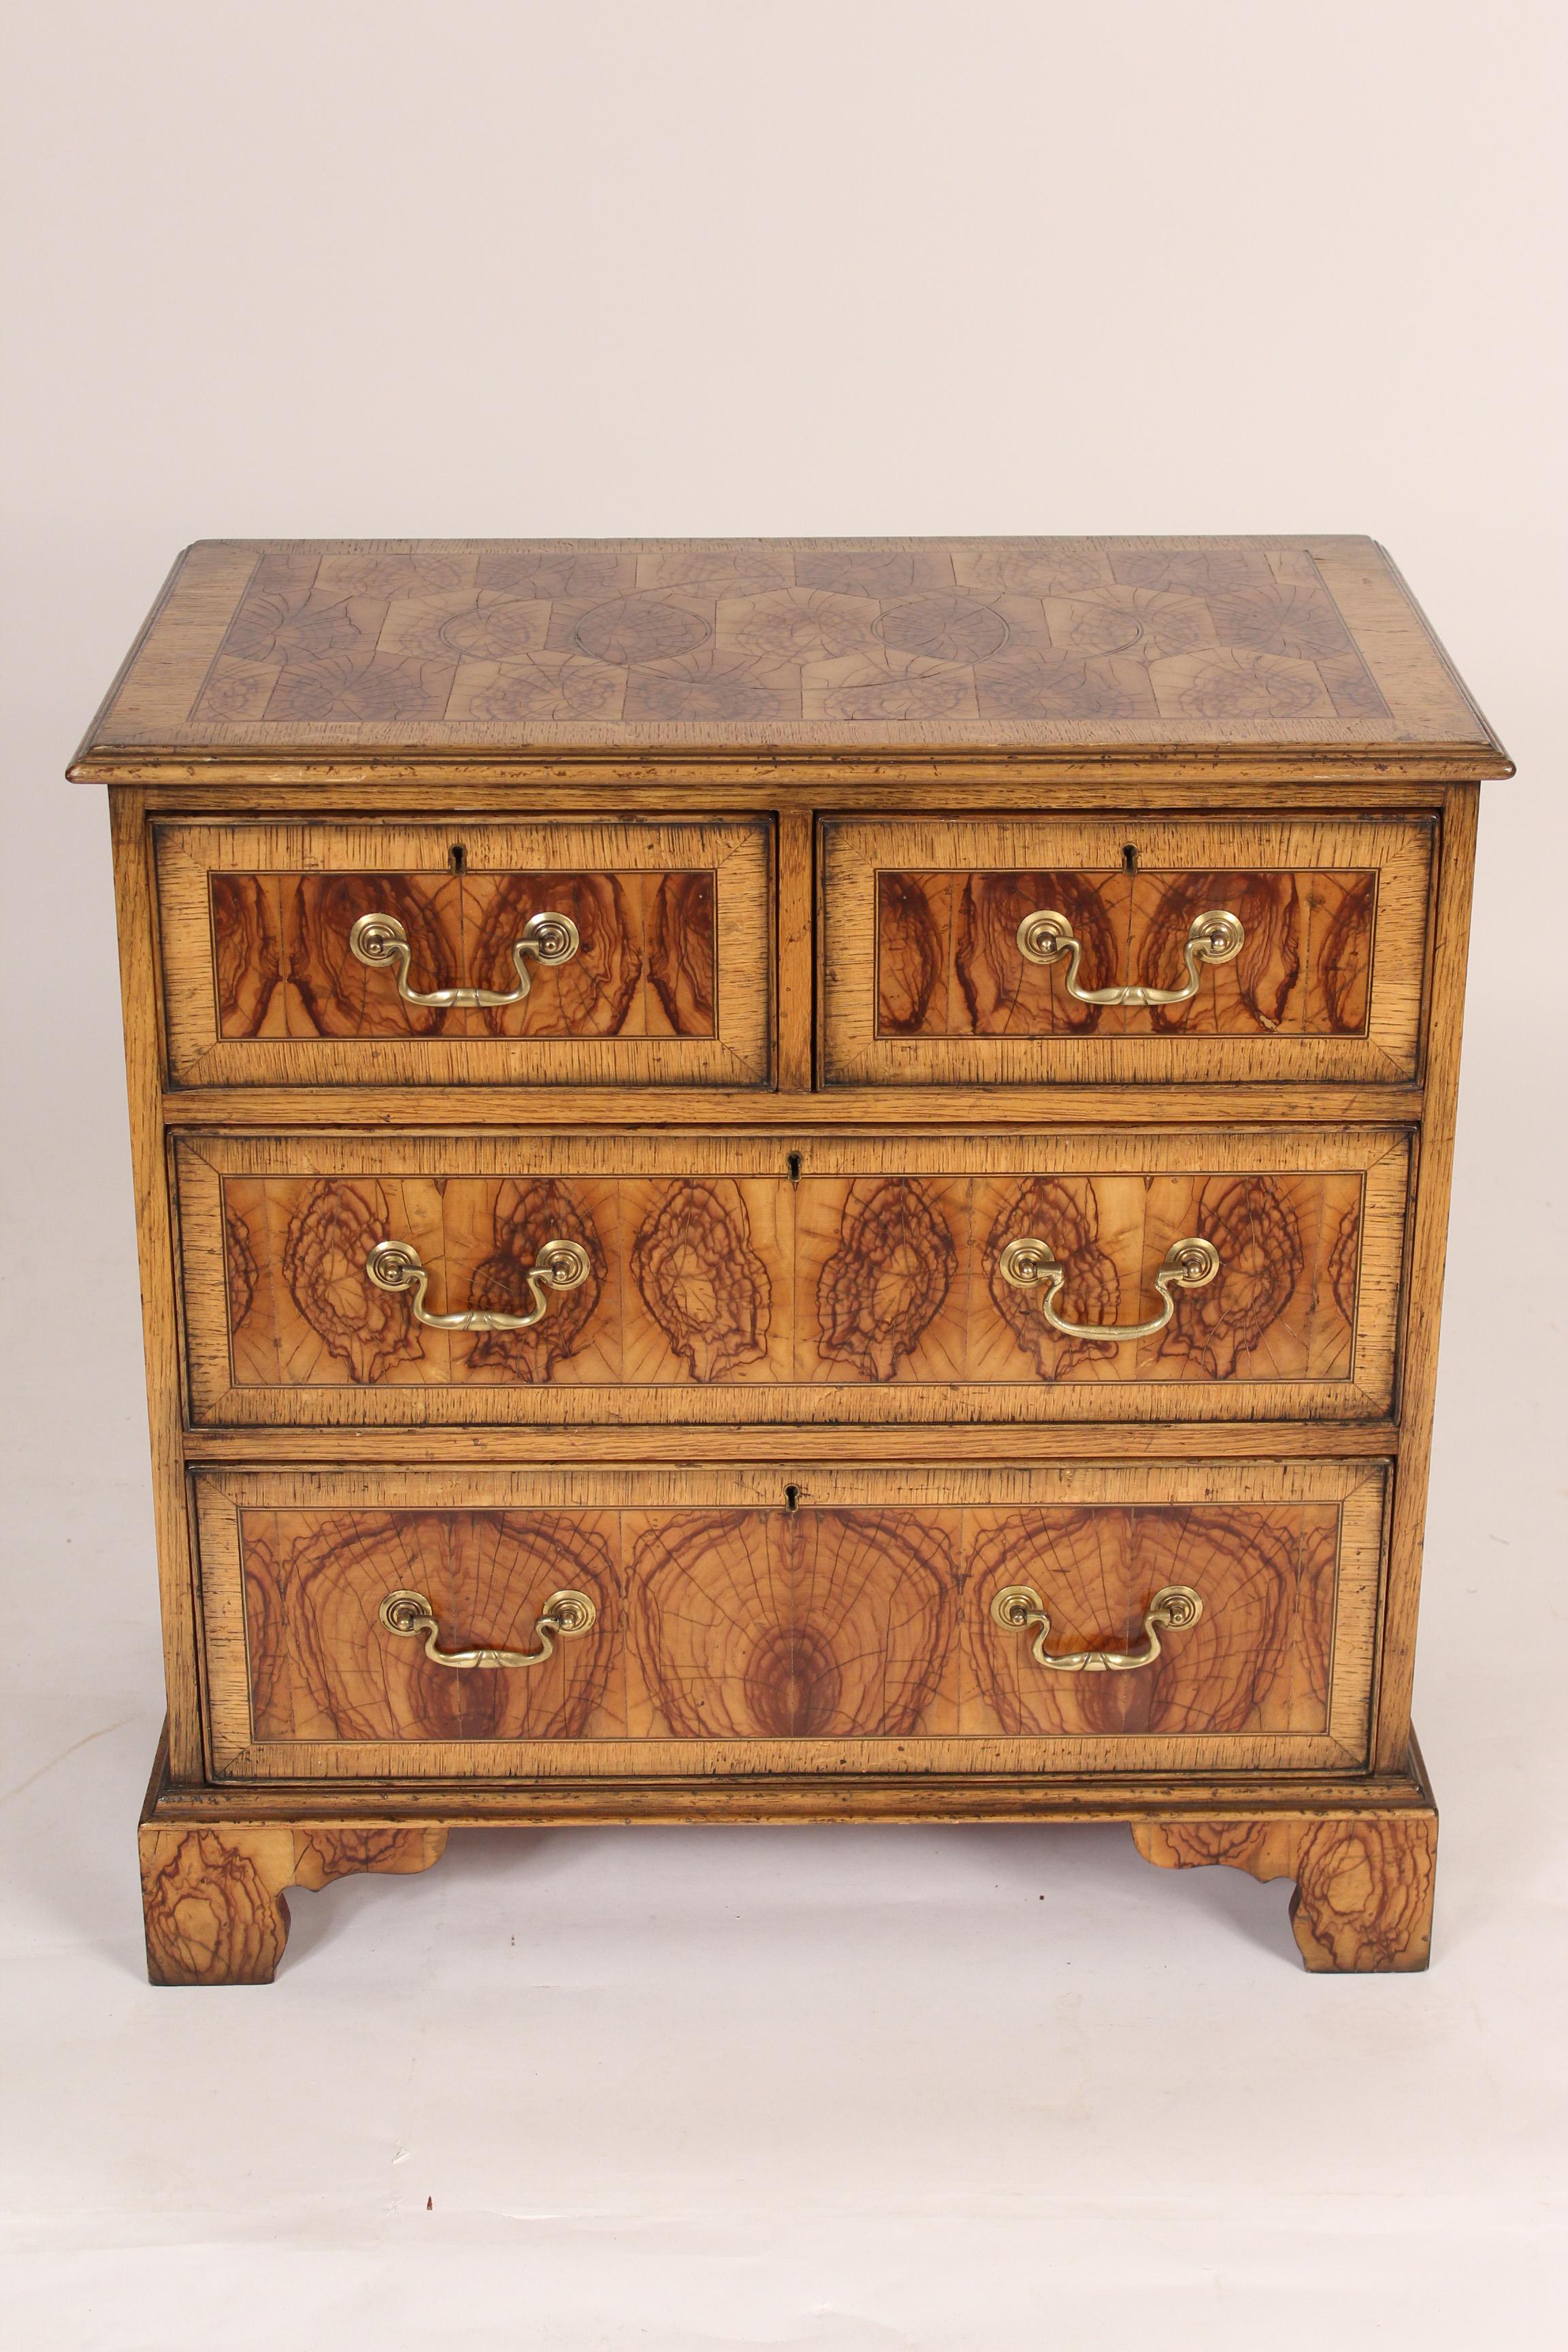 George II style oyster burl chest of drawers, circa mid-20th century. A rare type of wood, brass hardware and hand dovetailed drawer construction. The front and top are oyster burl the sides are oak.